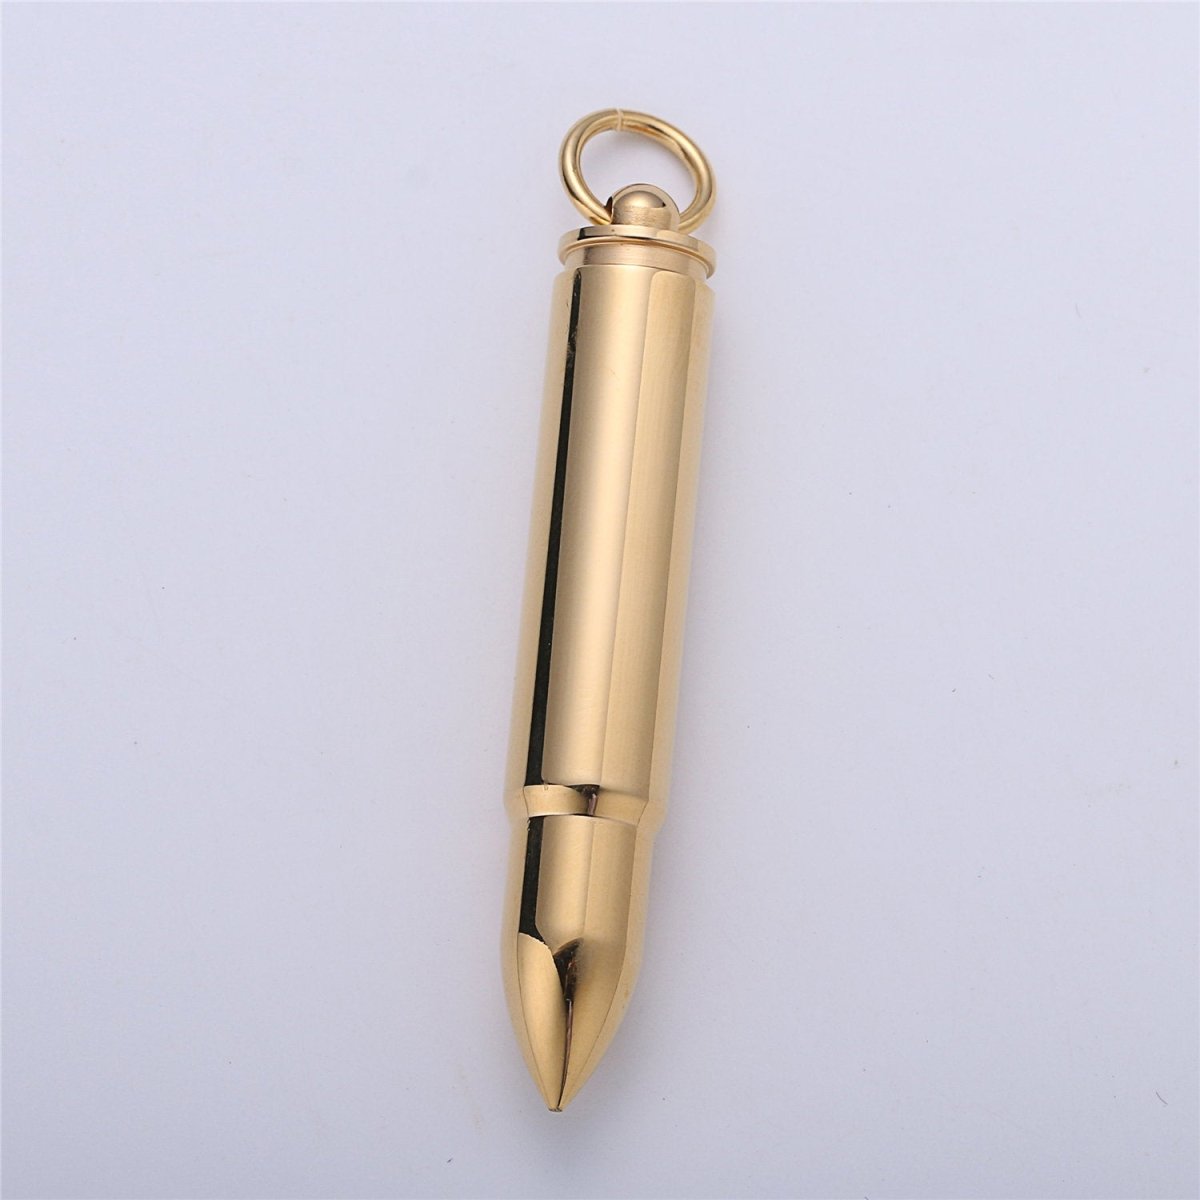 Mens Stainless Steel Bullet Pendant Necklaces Urn Ashes Necklace Supply for Cremation Memorial Keepsakes in Gold Silver Ammo E-664 - DLUXCA